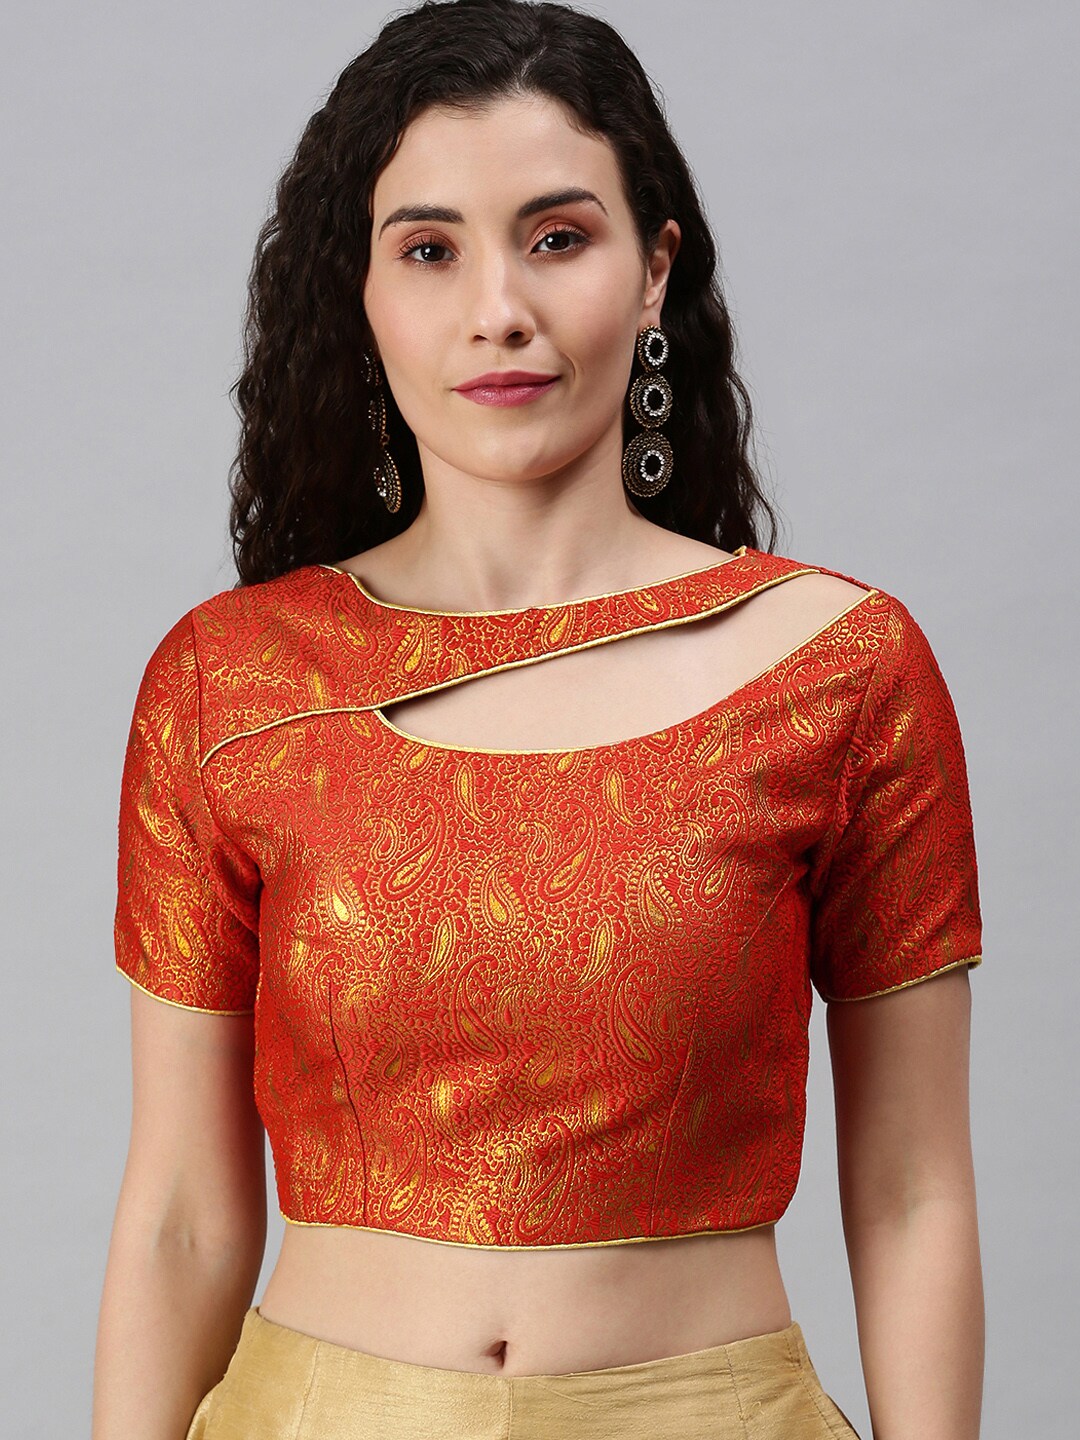 flaher Women Red & Golden Woven Saree Blouse Price in India